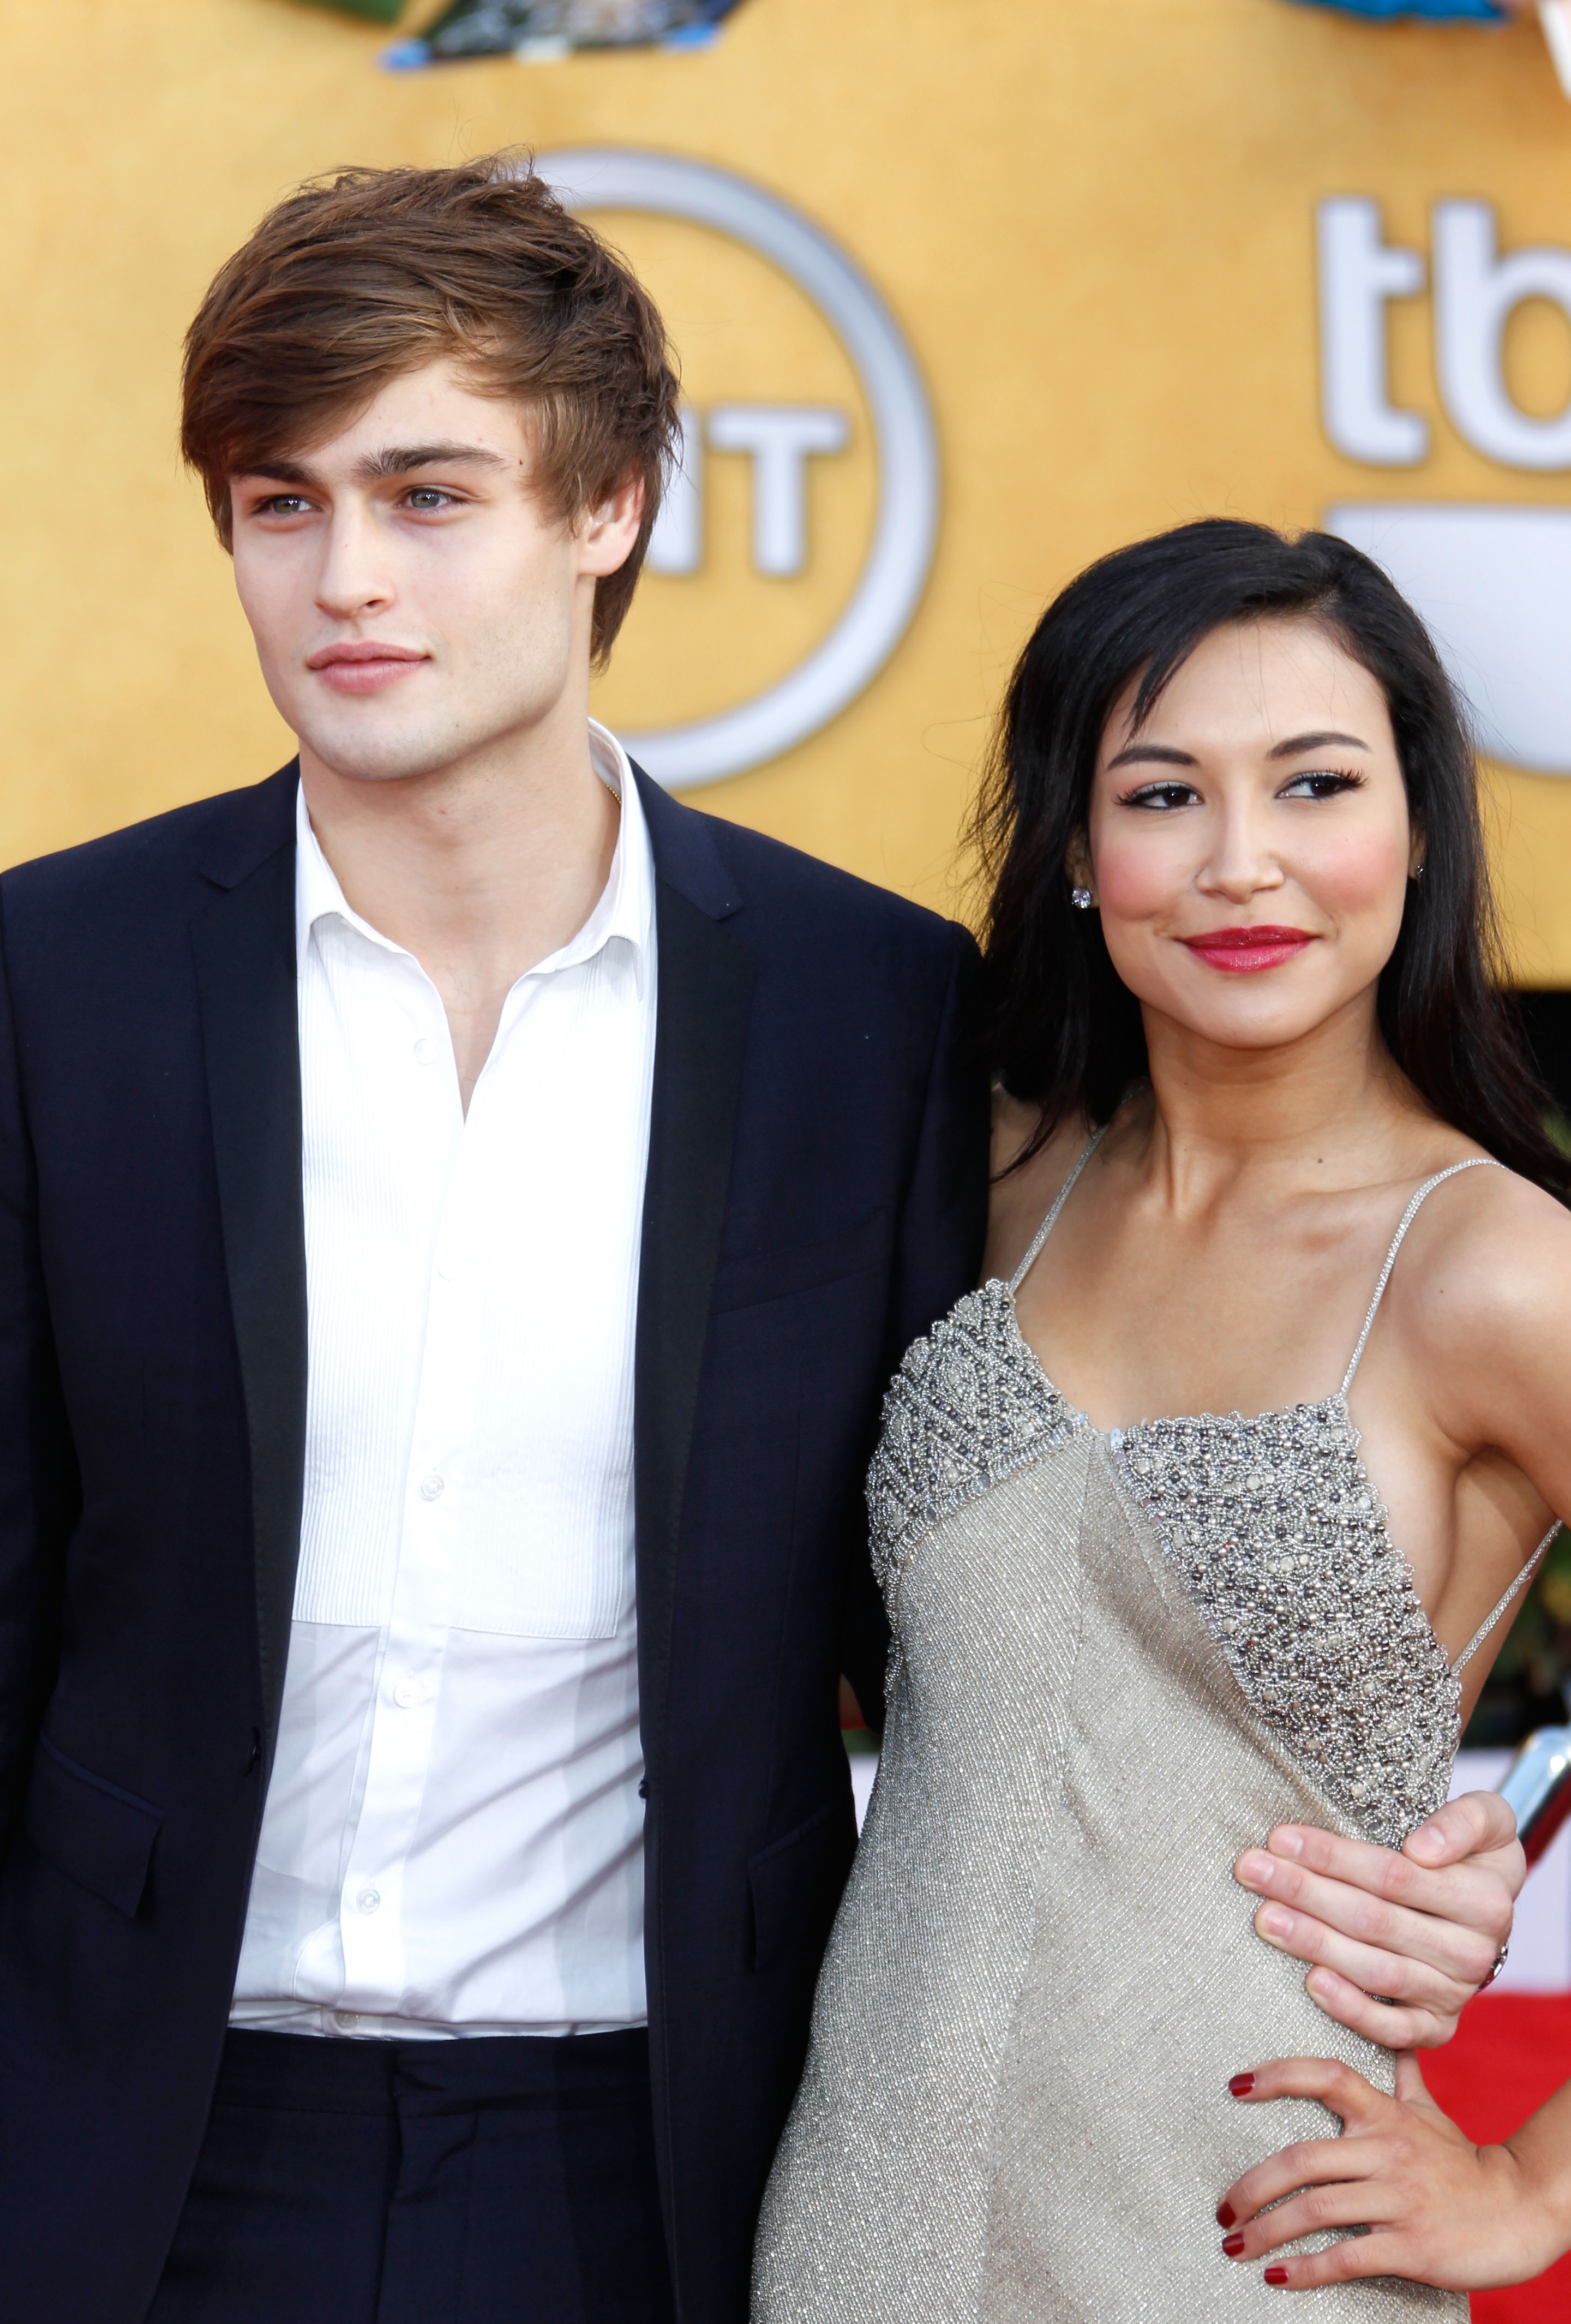 Douglas Booth and Naya Rivera arrive at the 17th Annual Screen Actors Guild Awards held at The Shrine Auditorium, on January 30, 2011, in Los Angeles, California. | Source: Getty Images